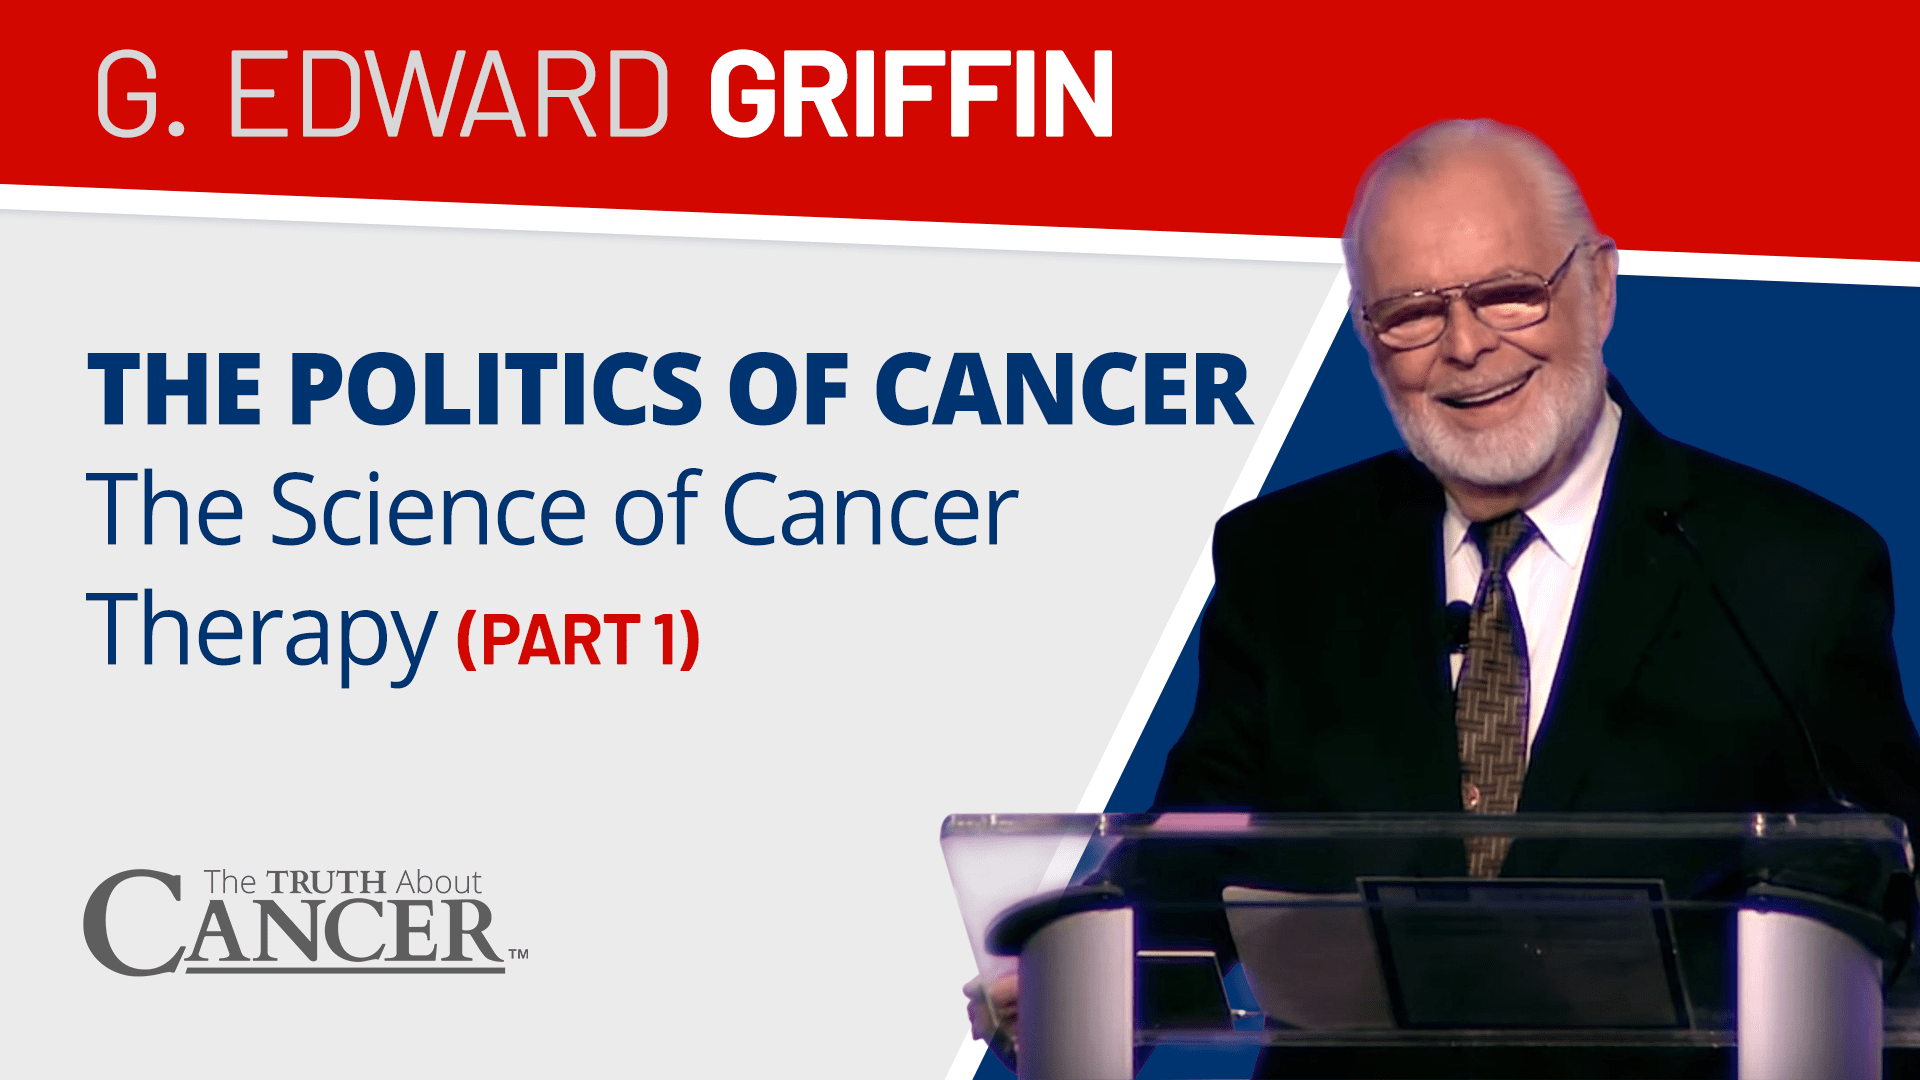 The Politics of Cancer - The Science of Cancer Therapy - Part 1 (video)